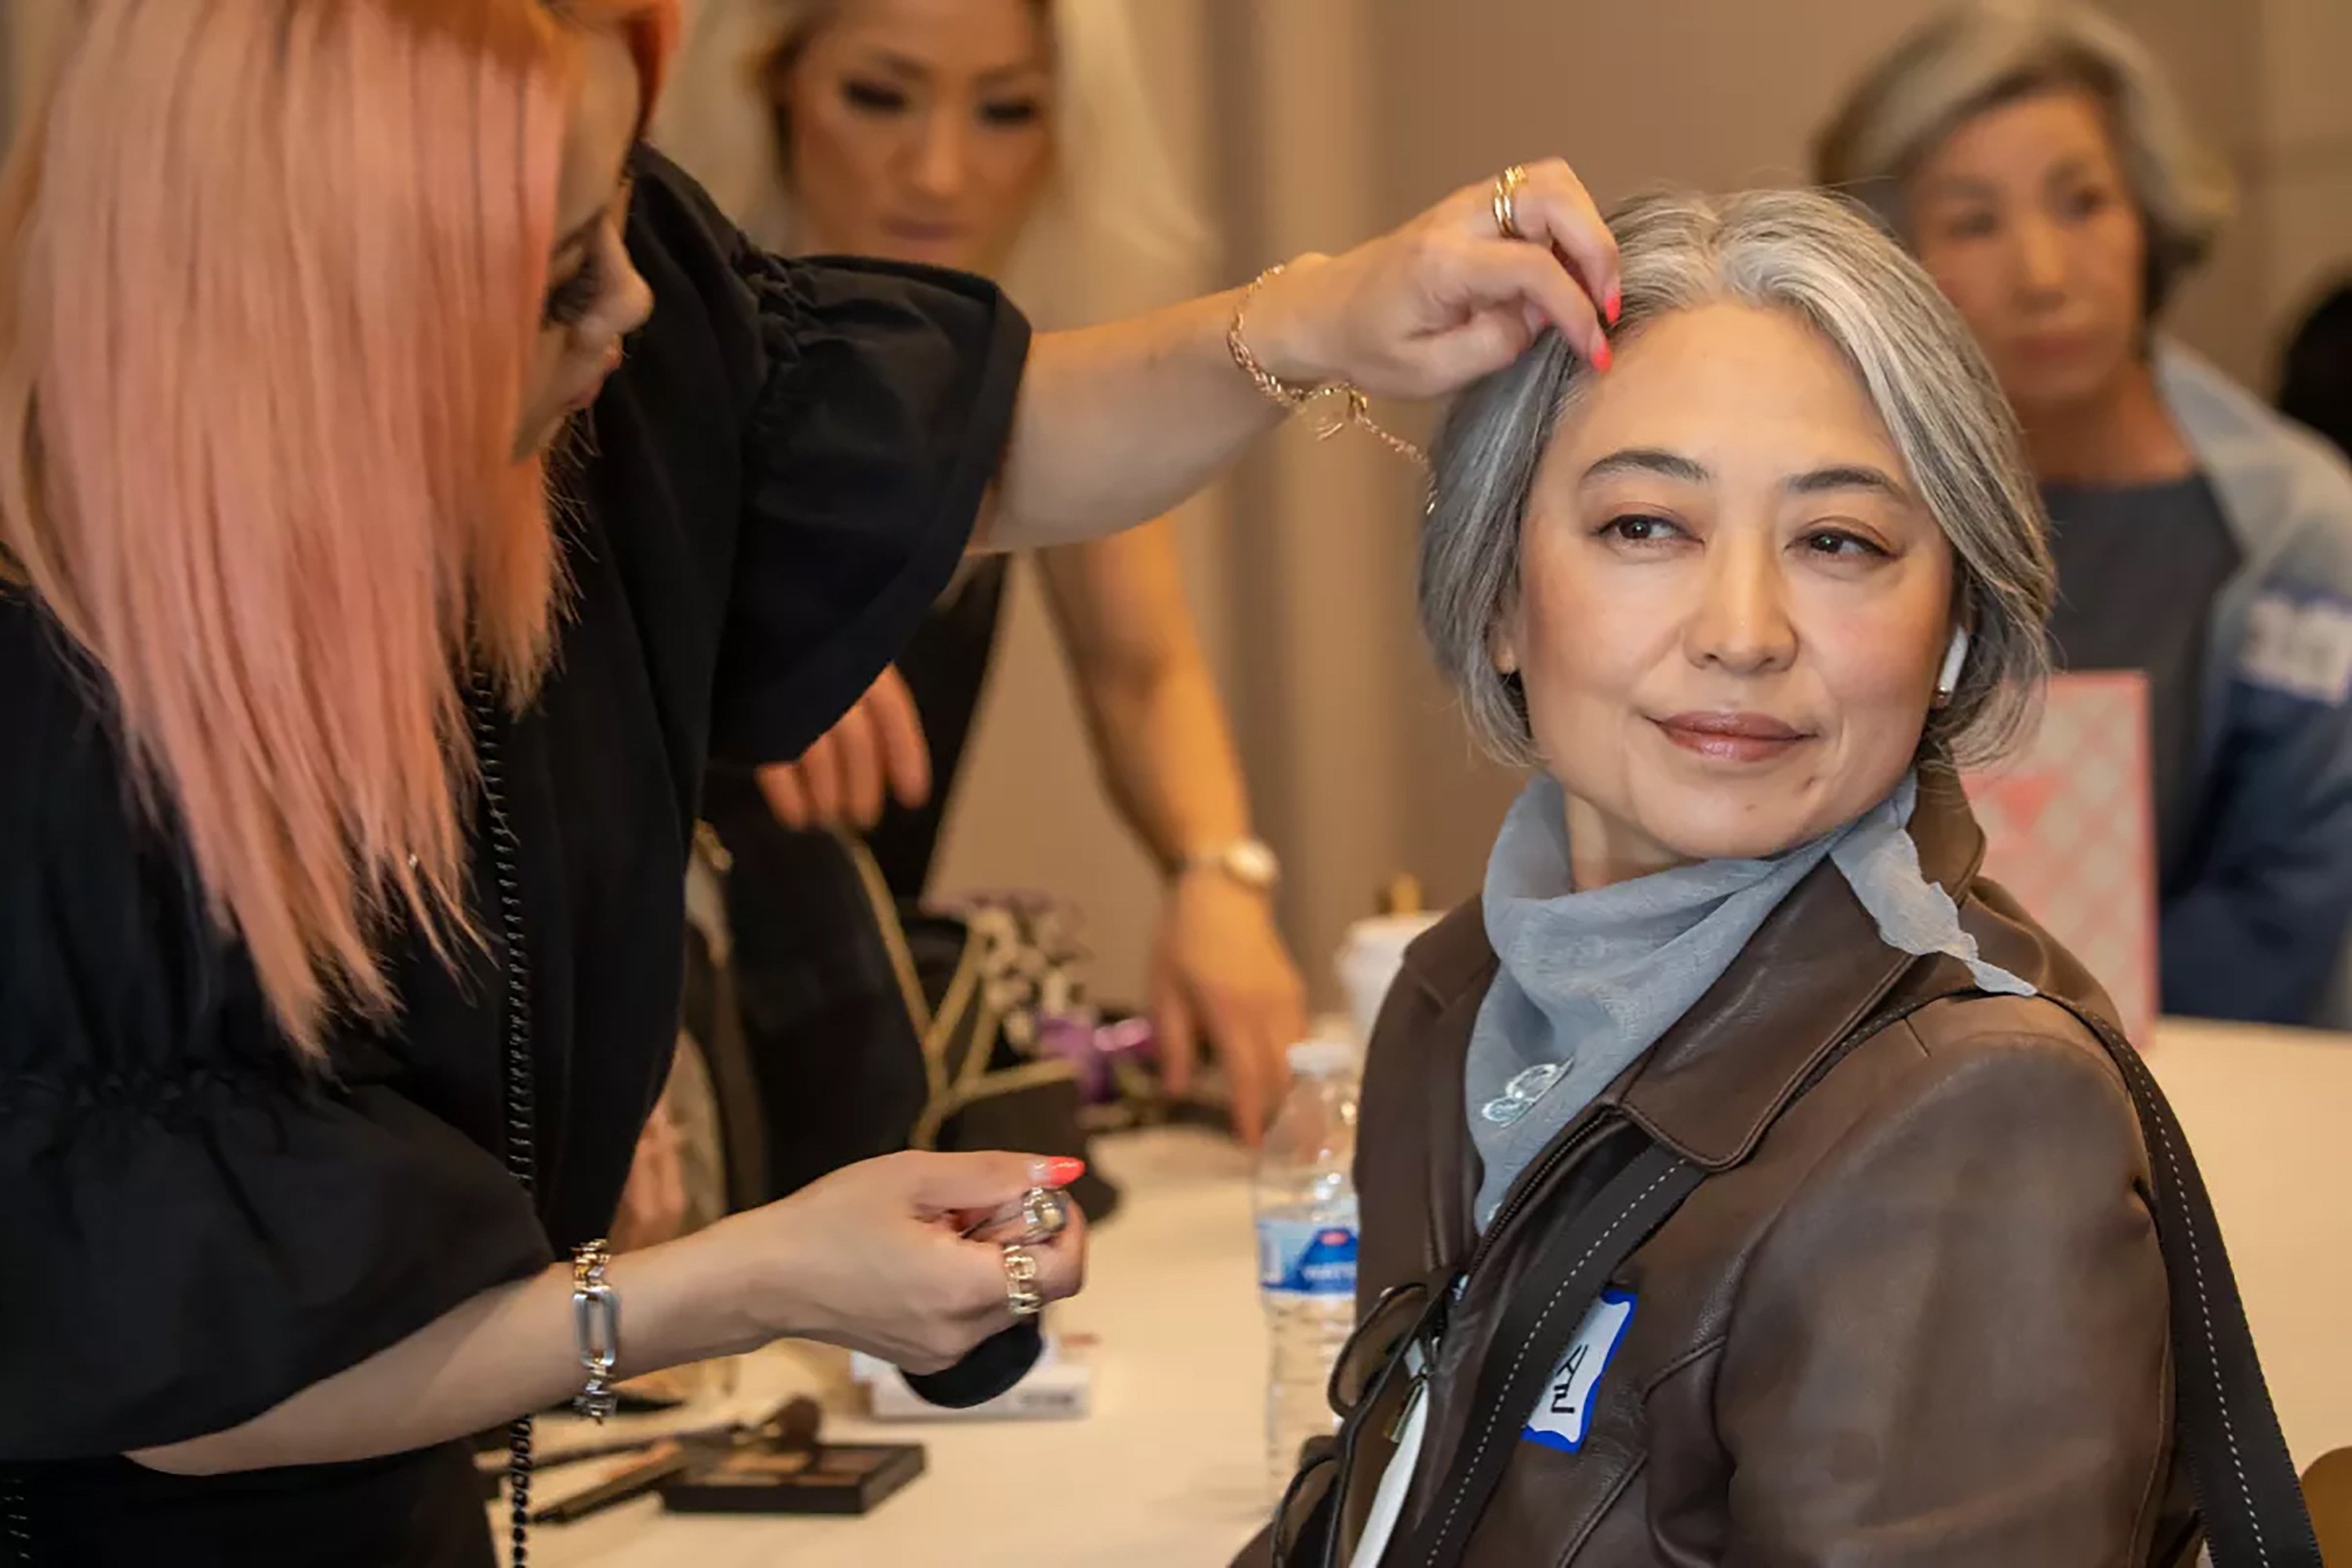 Makeup artist Junyoung McArdle, left, helps Grace Ju, 55, ready for Silver Models USA senior model audition (age 55+) at the Line LA Hotel. Photo: TNS